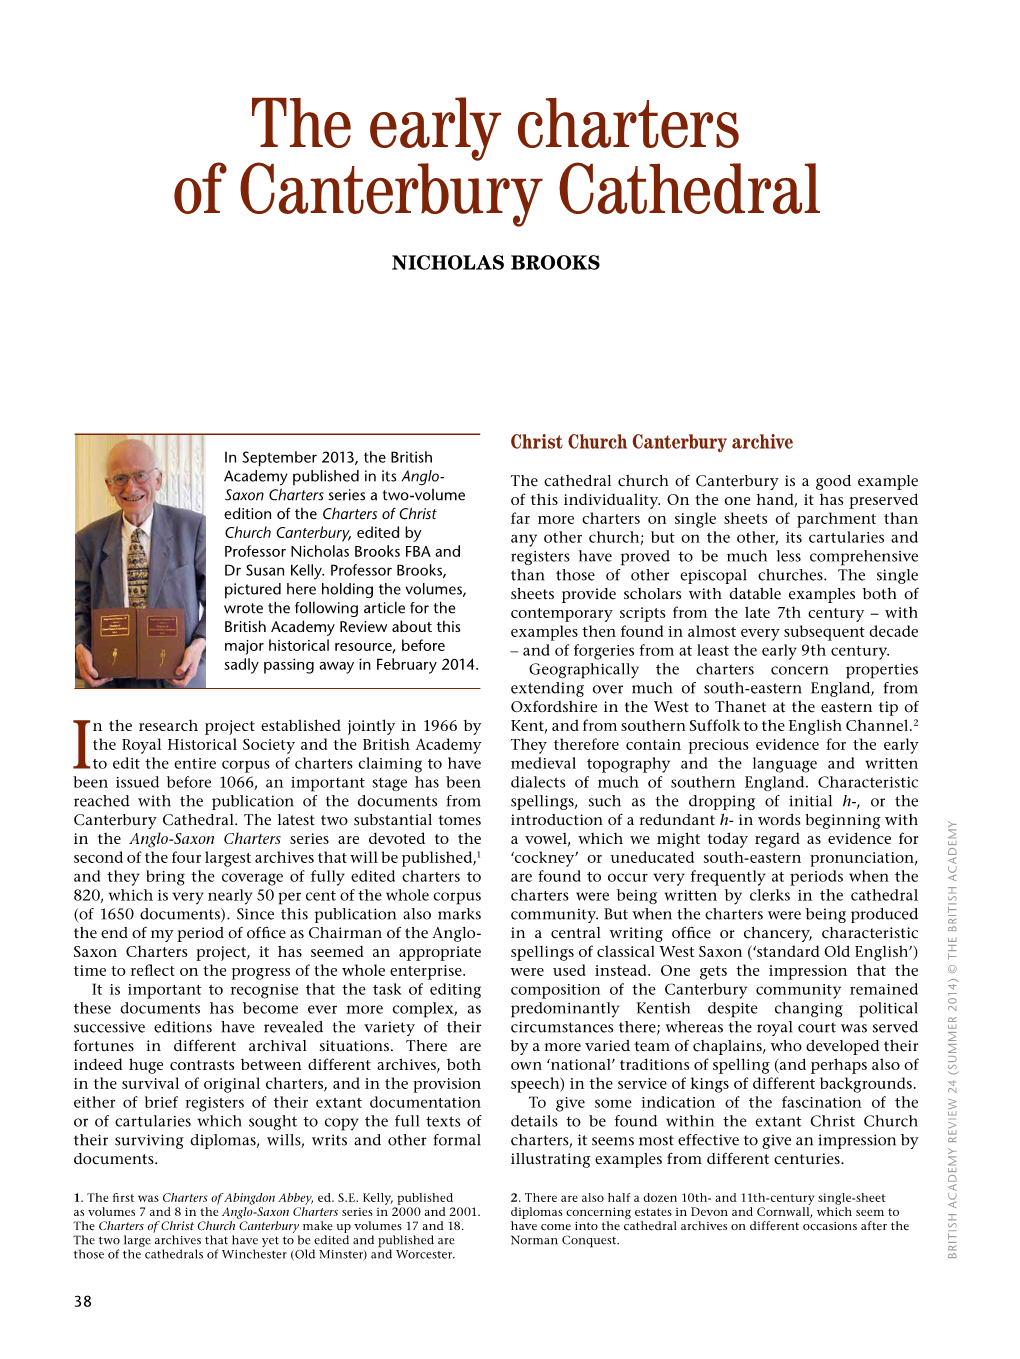 The Early Charters of Canterbury Cathedral